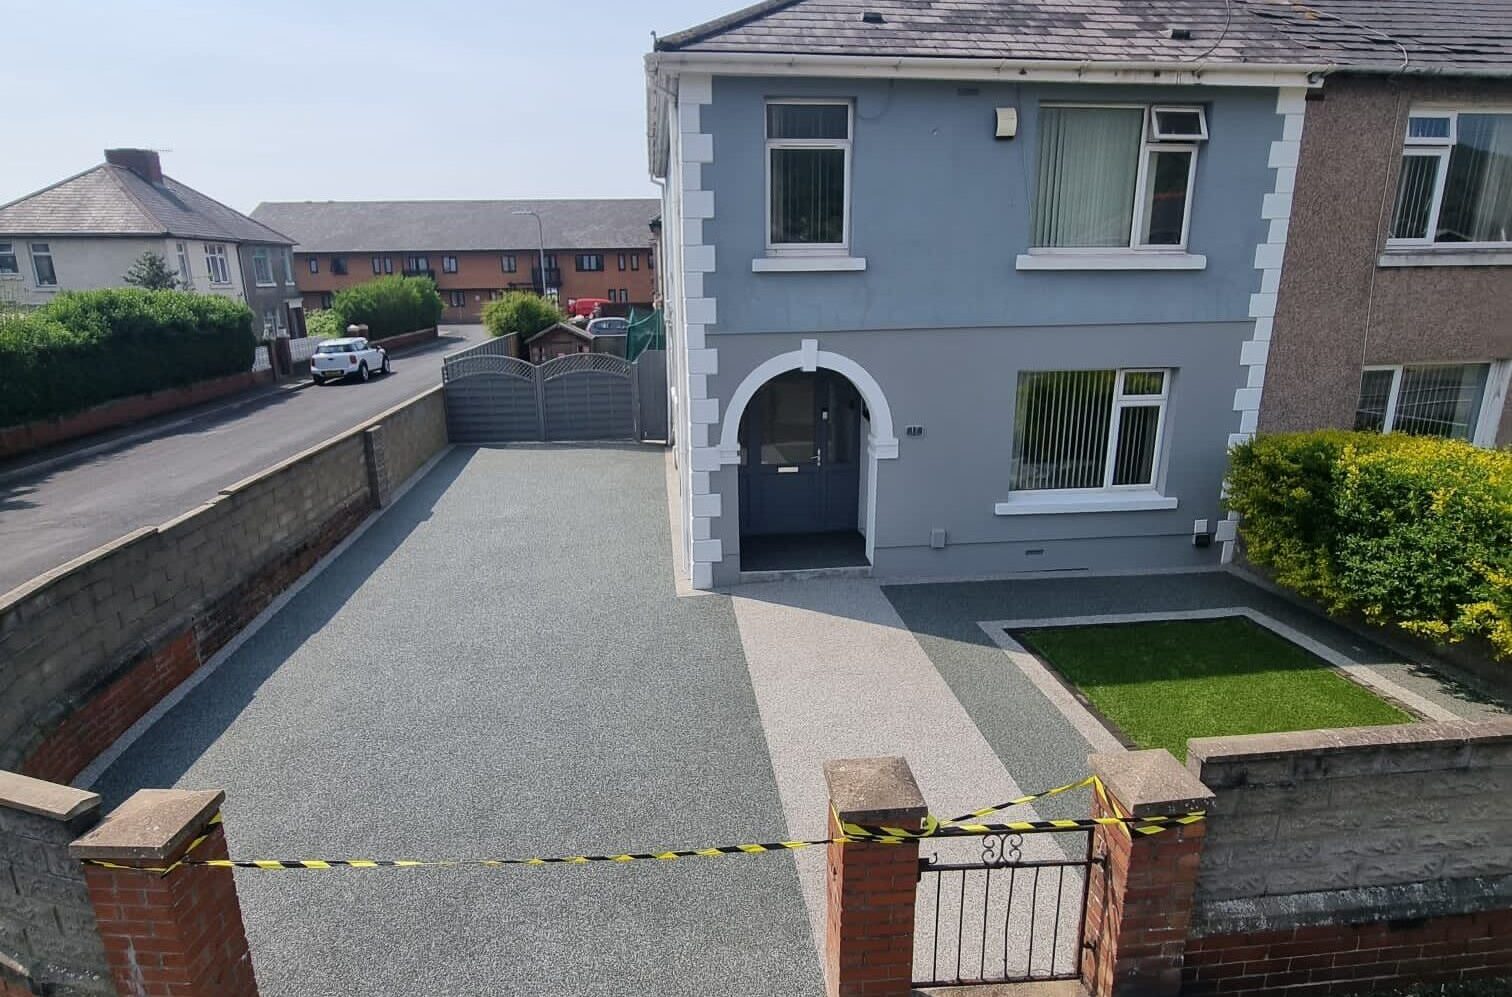 This is a photo of a Resin driveway carried out in Newport. All works done by Resin Driveways Newport